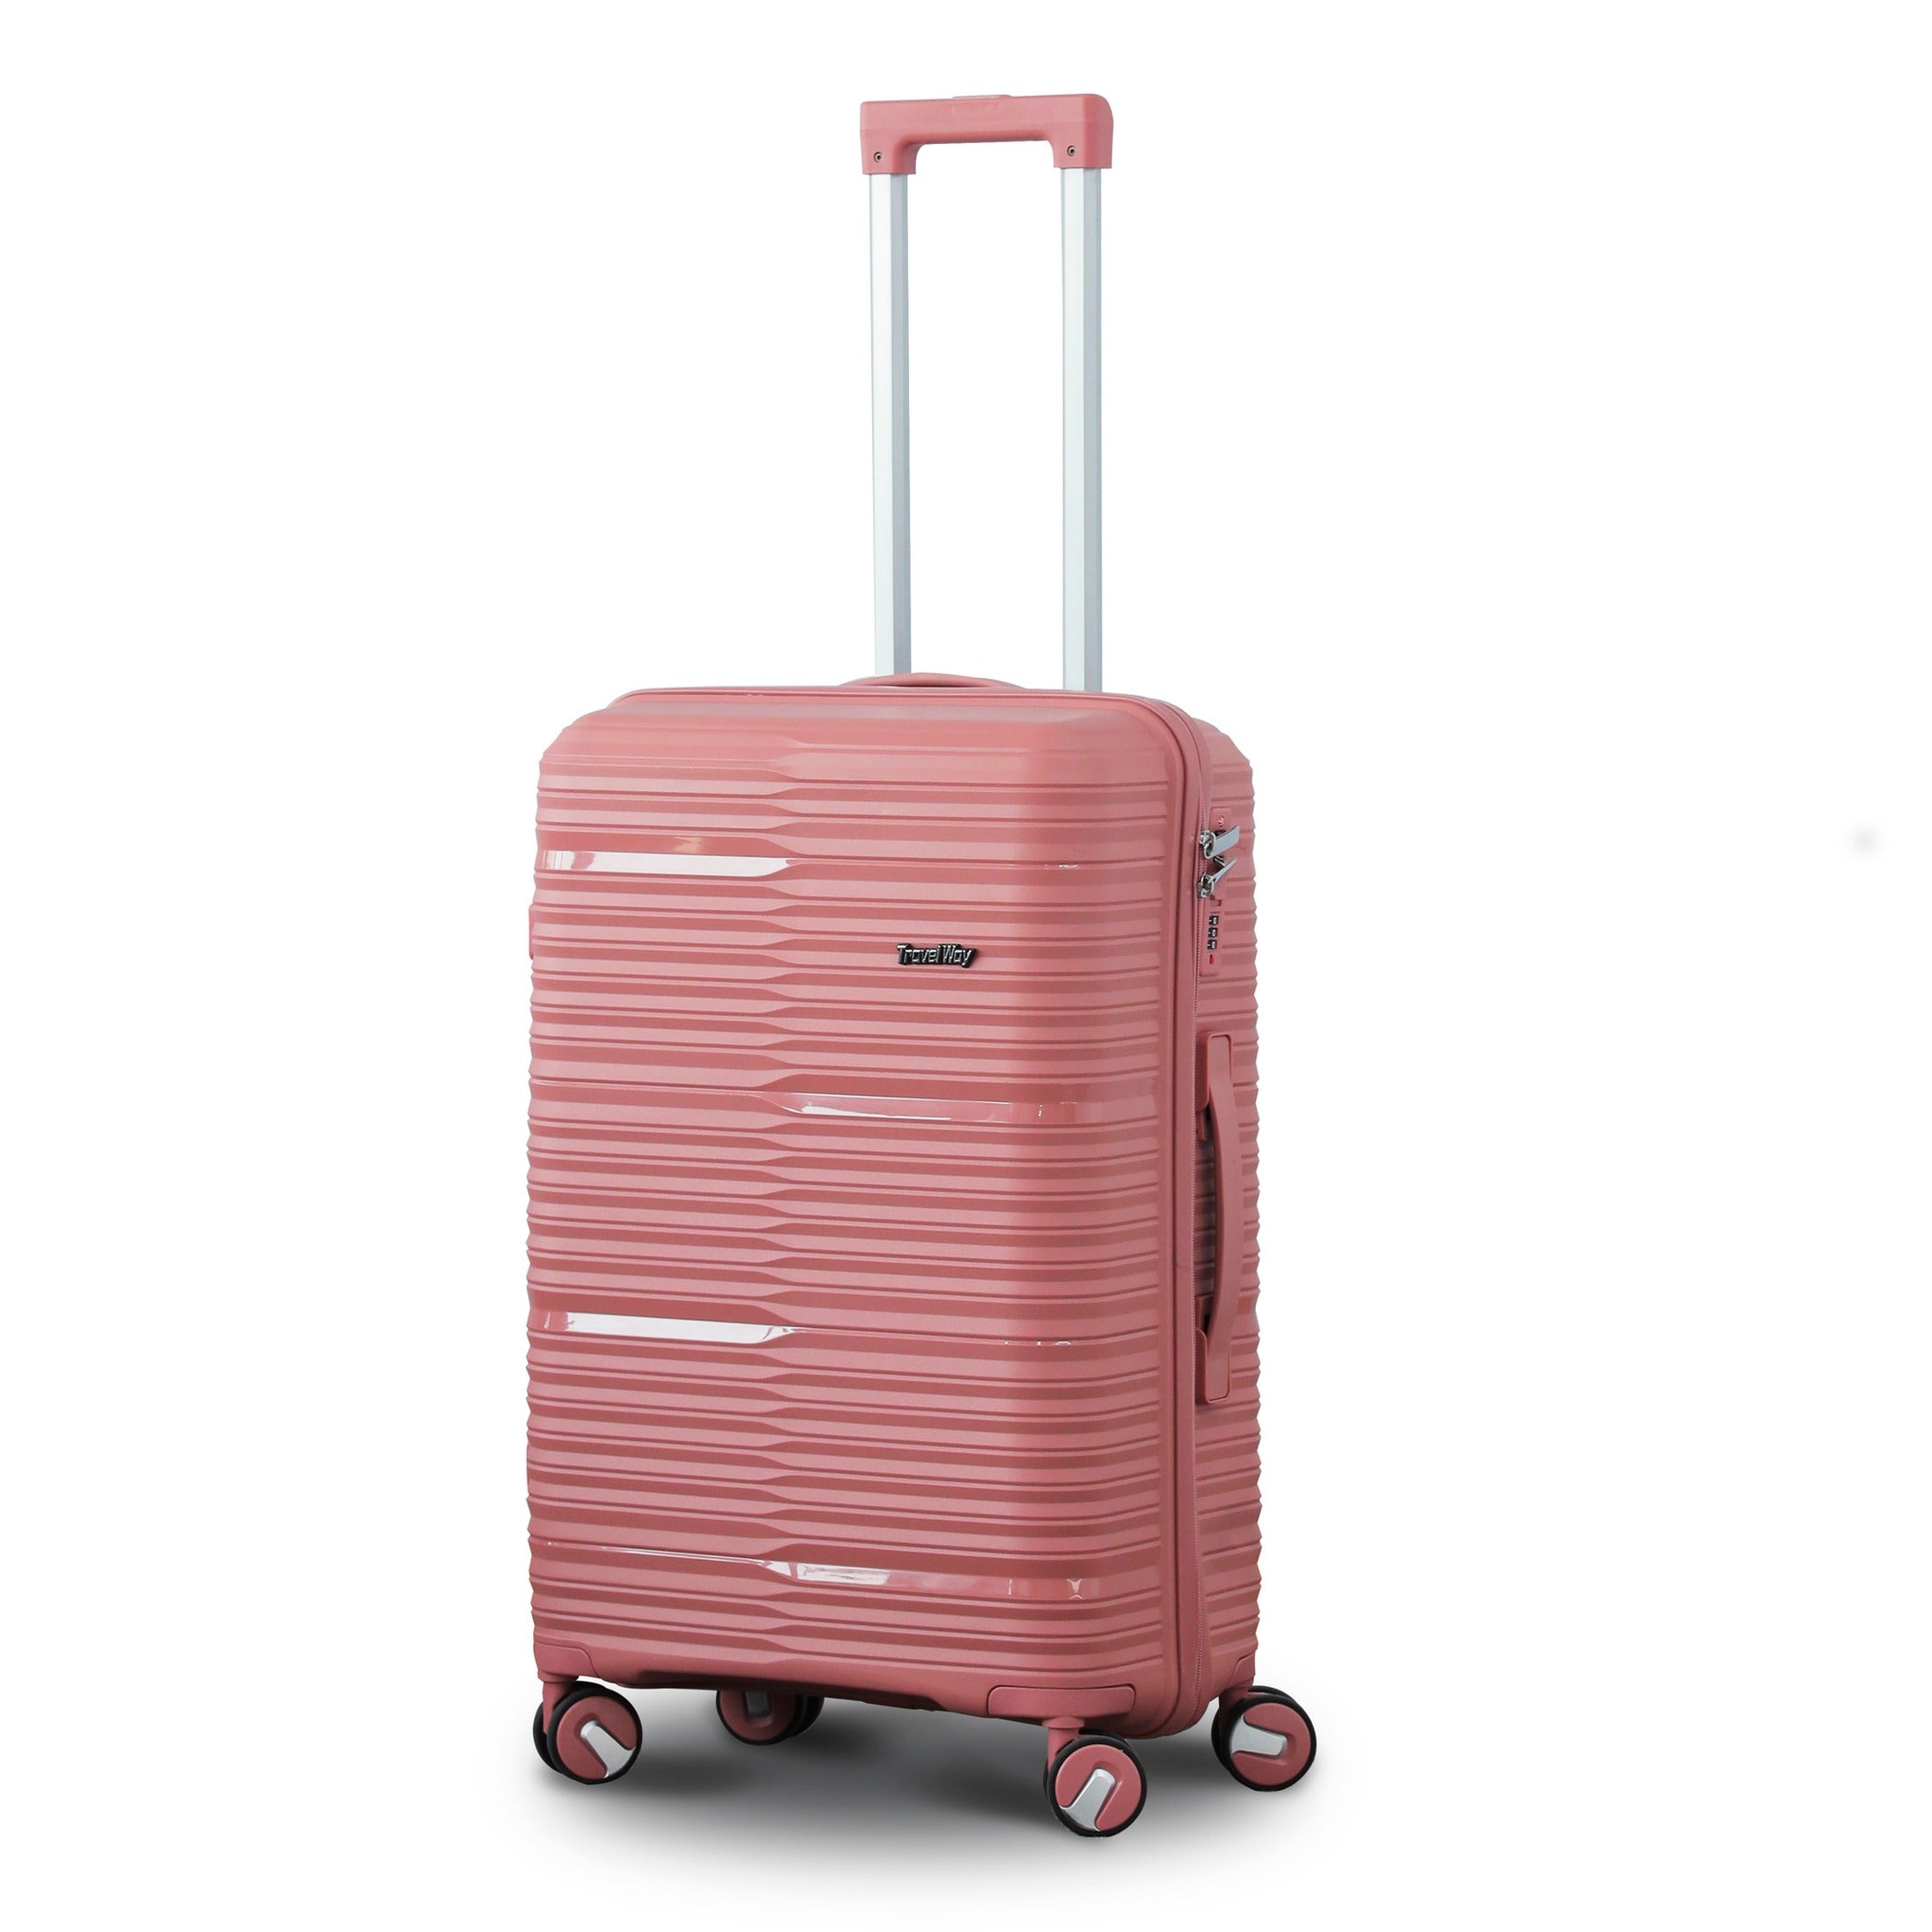 24" Travel Way PP Unbreakable Luggage Bag With Double Spinner Wheel